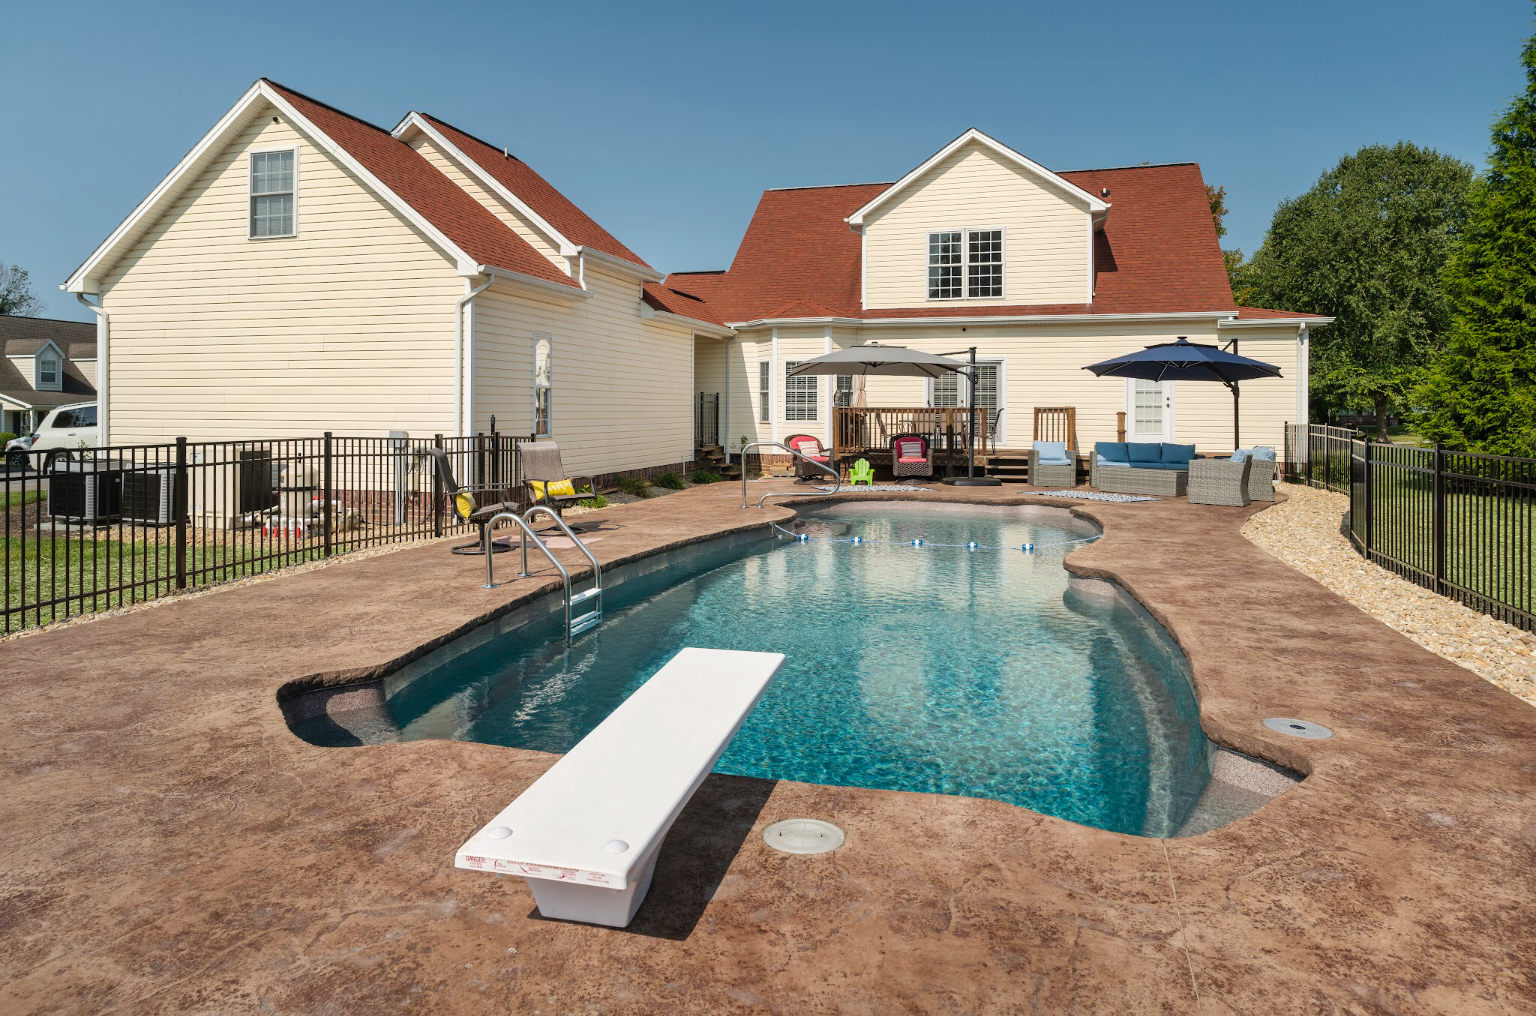 Backyard pool with deep end and diving board in a compact installation with metal safety fence